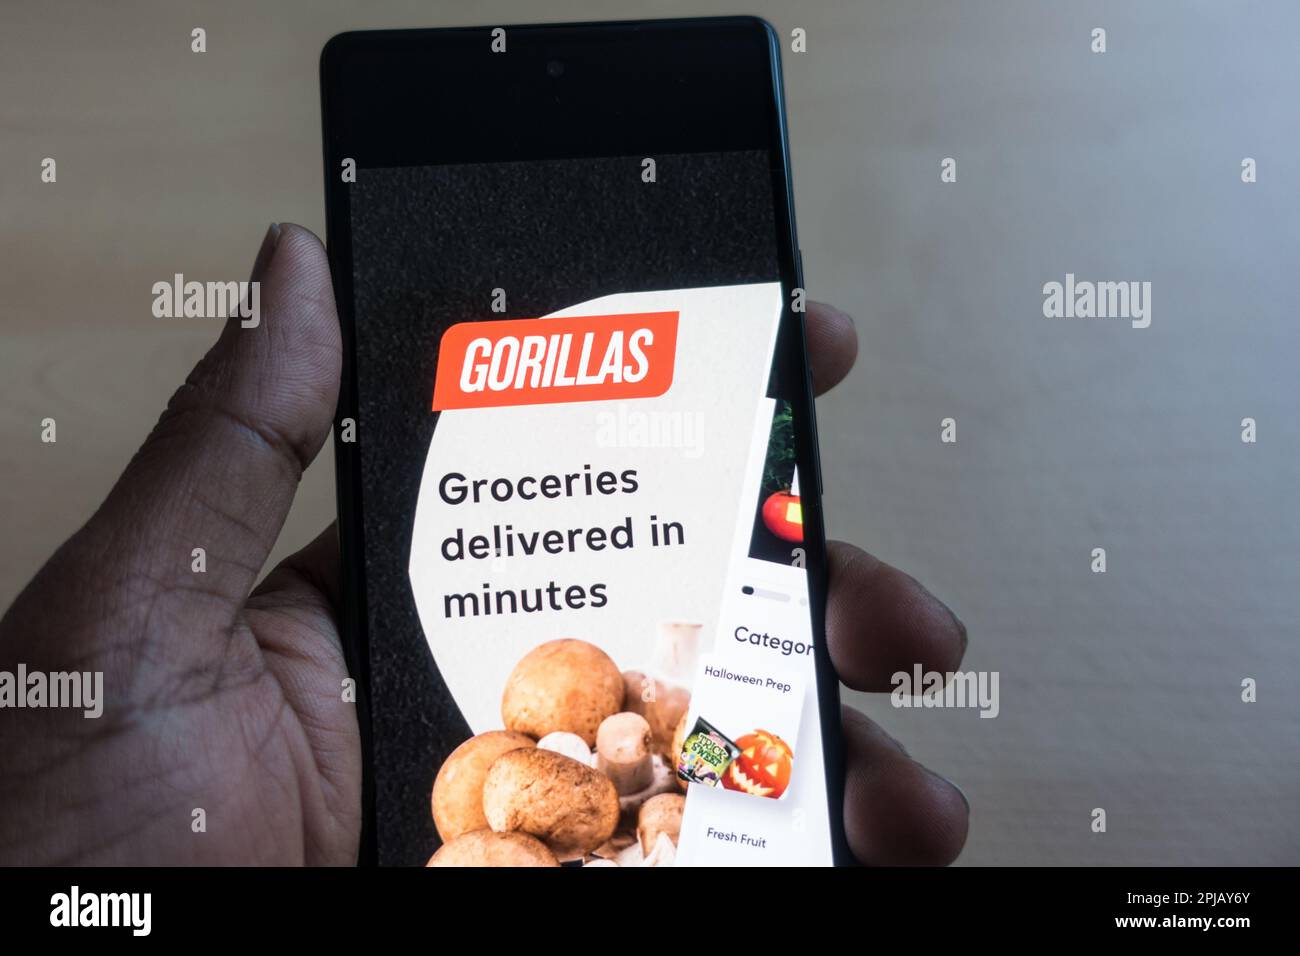 Gorillas app for food delivery Stock Photo